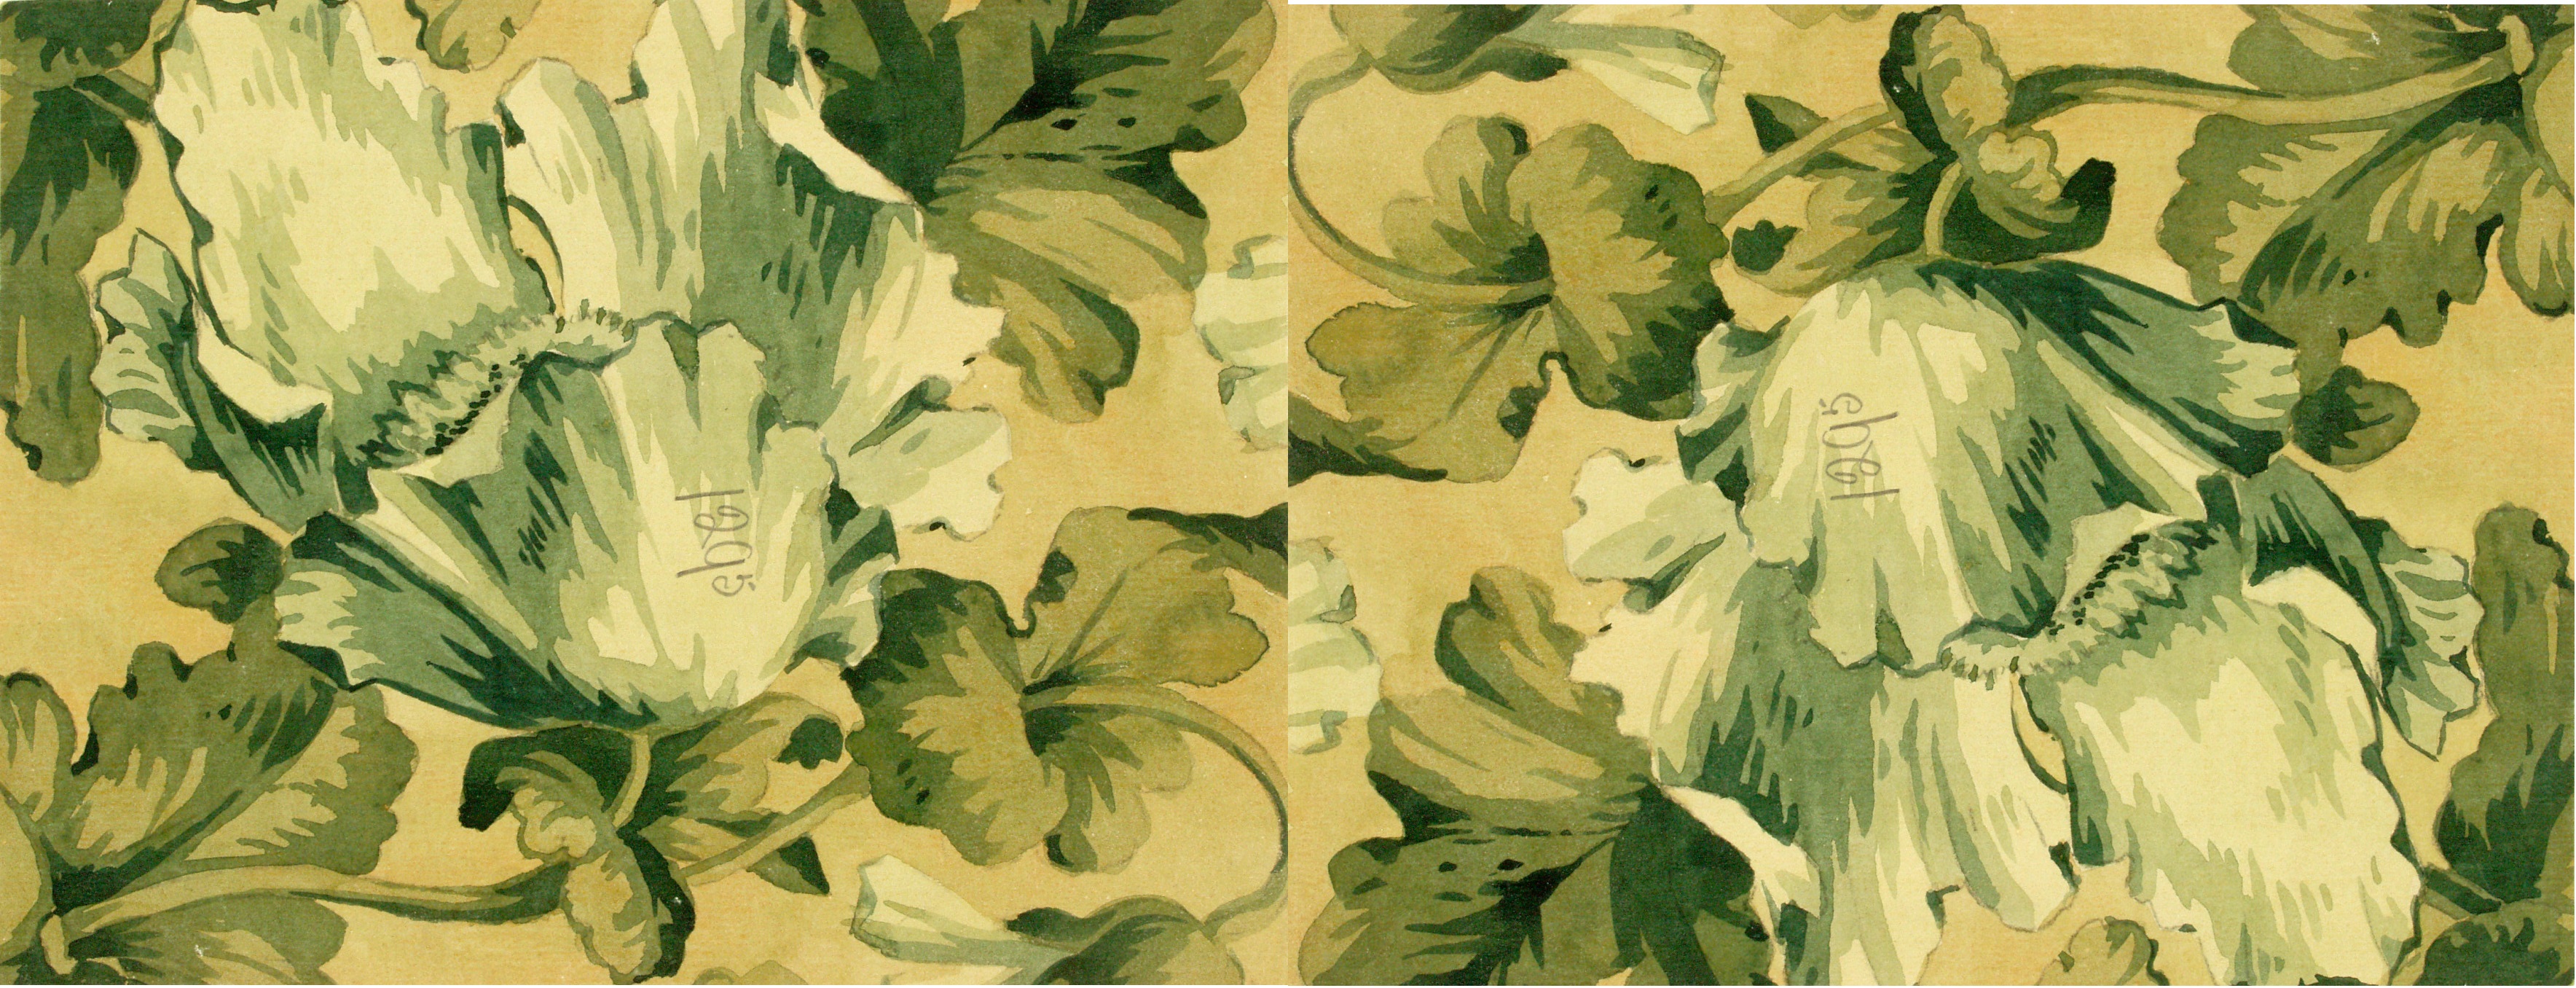 section of design for wallpaper with a poppy-like flower and leaf design